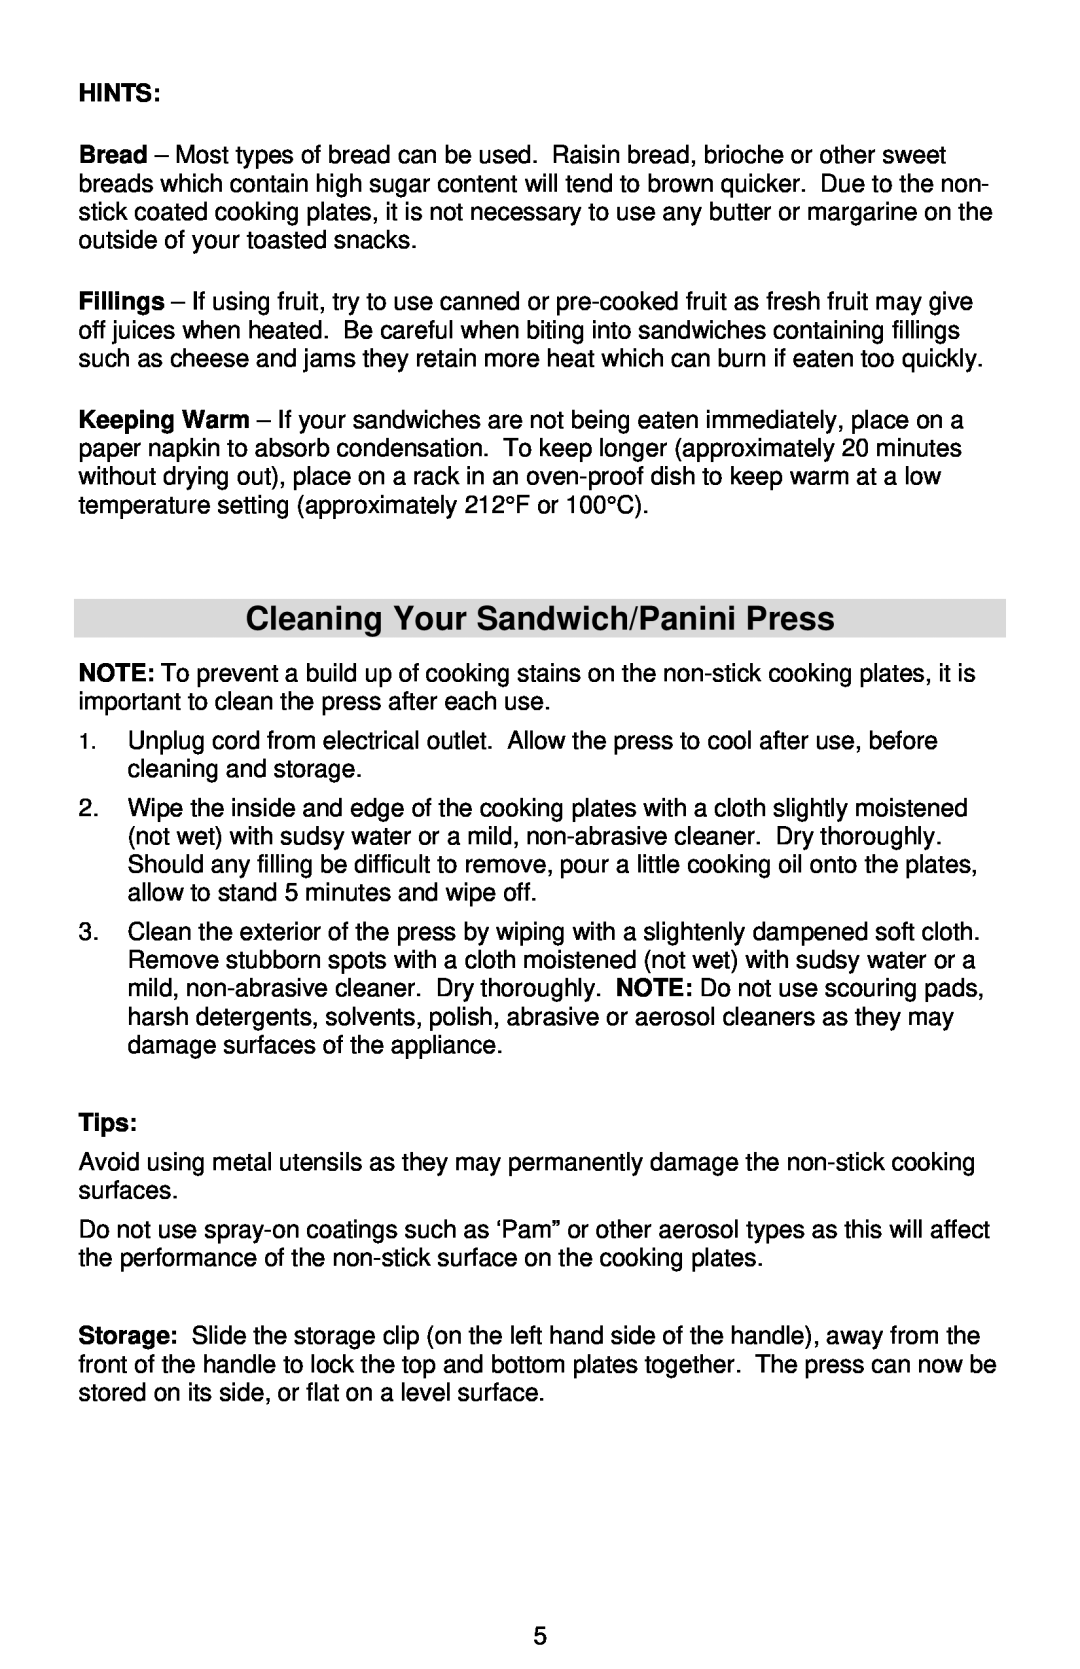 West Bend Sandwich Maker instruction manual Cleaning Your Sandwich/Panini Press, Hints, Tips 